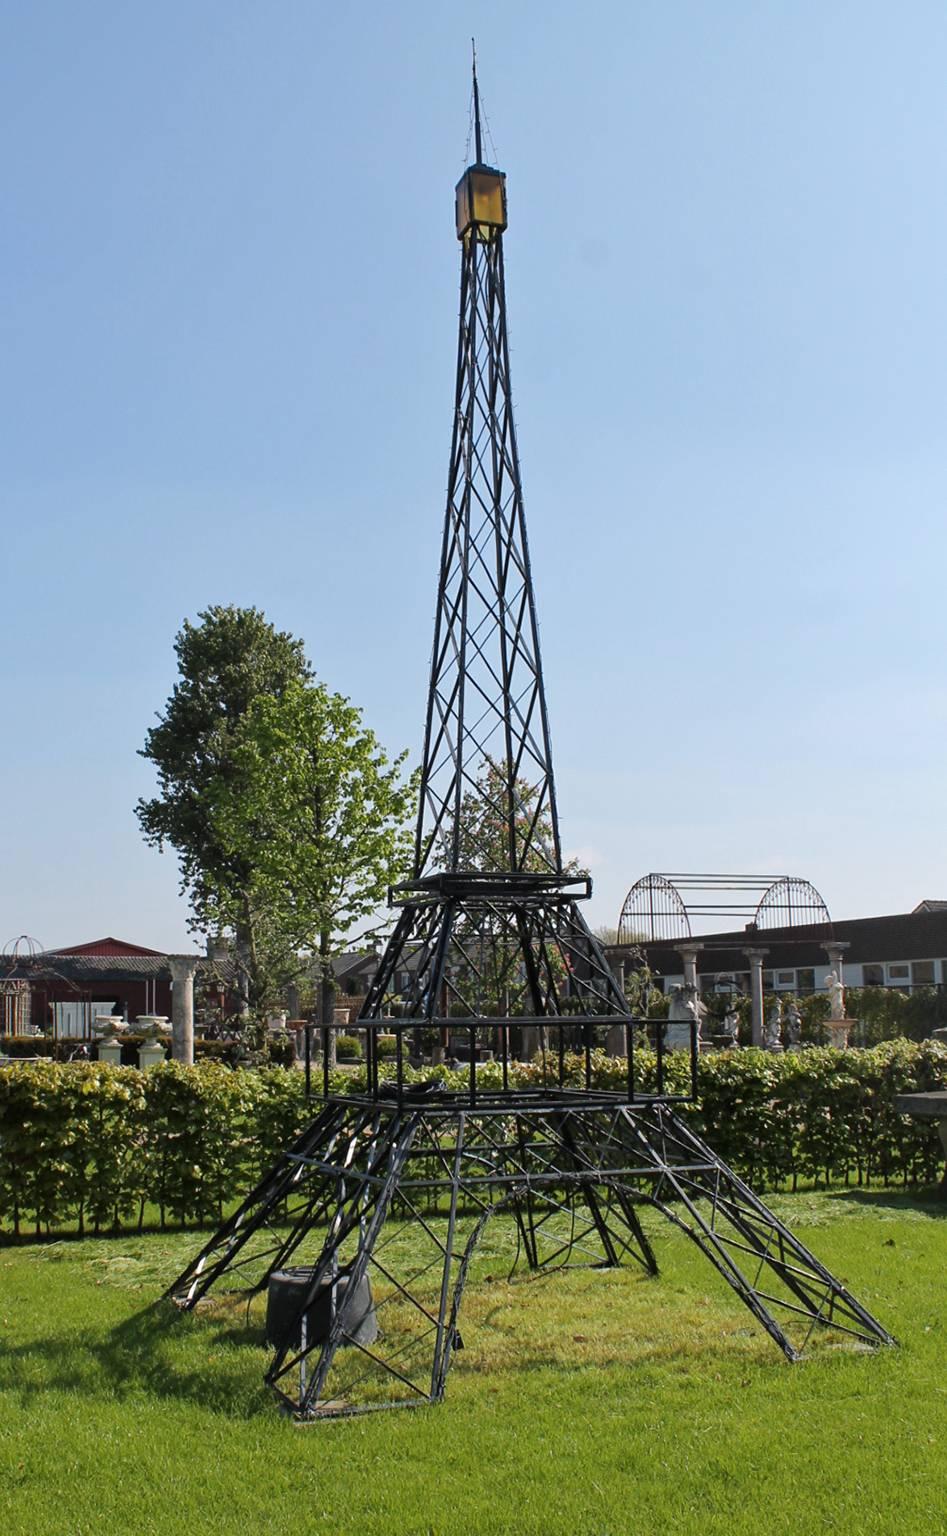 Do you love Paris and France.

Than you should buy this very nice and vintage Eiffel Tower.
It will fit perfectly in your park!